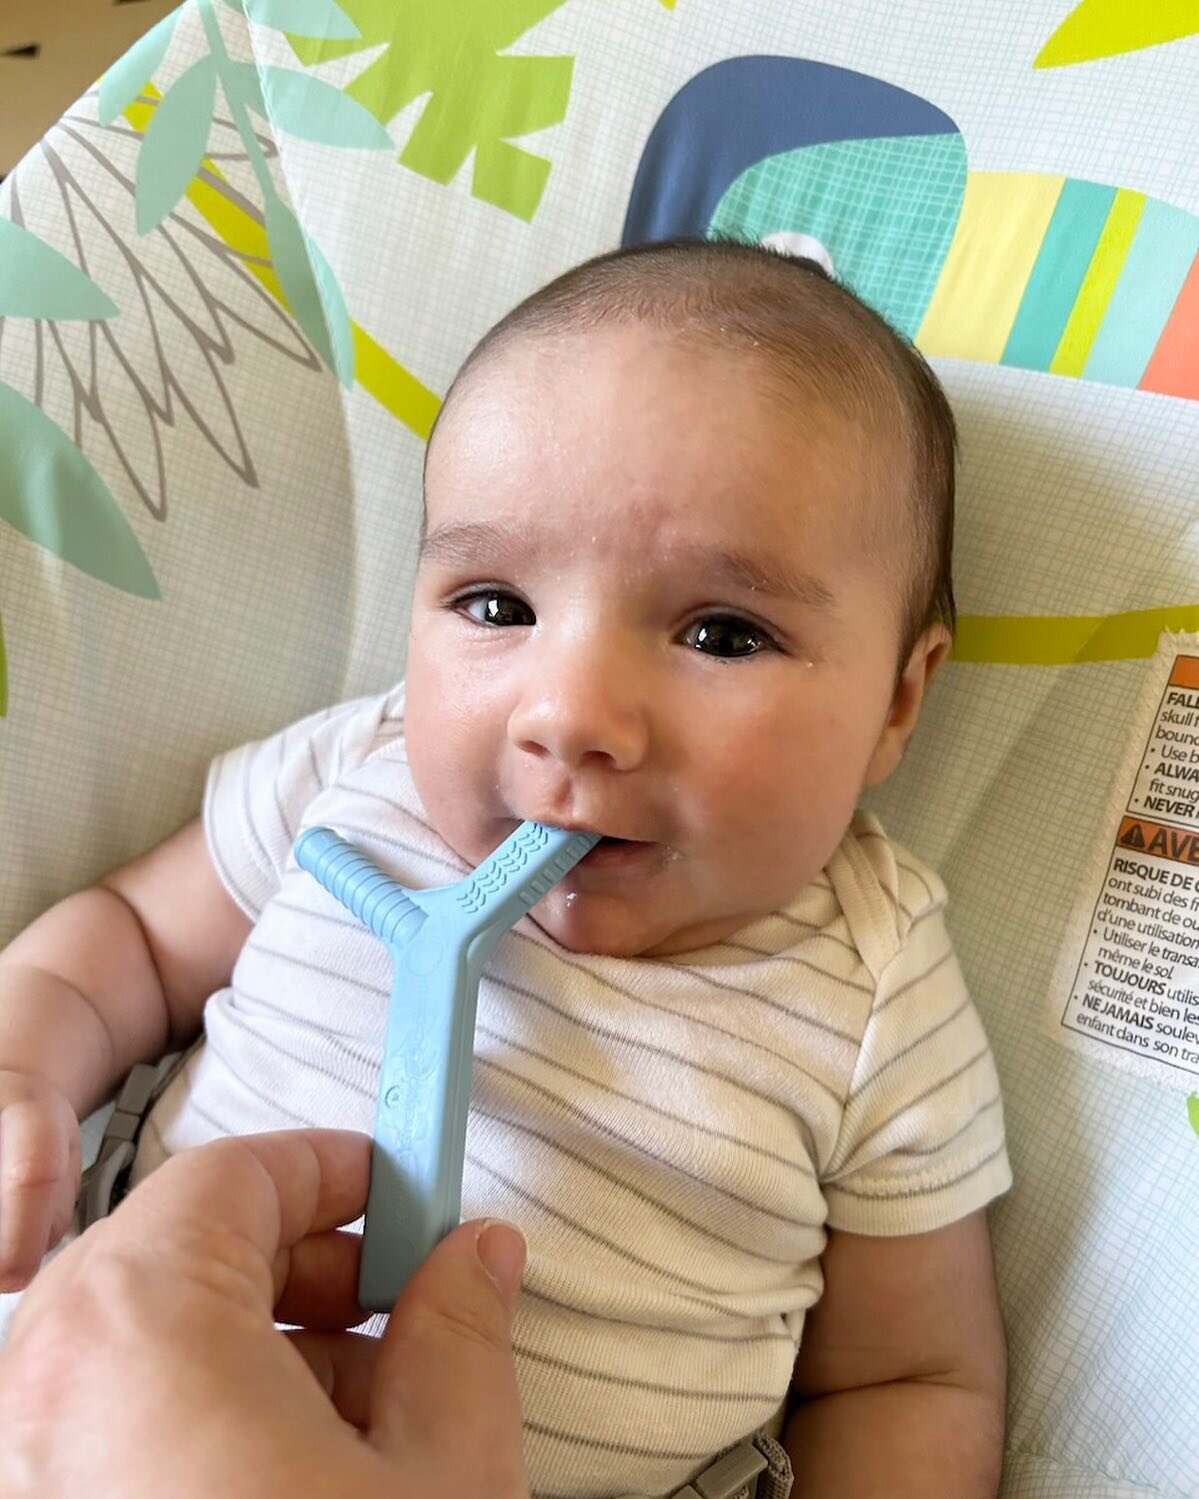 Start offering teethers to baby BEFORE 5-6 months of age for oral exploration, exposing to different textures, and getting their mouth ready for solids! 

Baby is using the Y- chew from @arktherapeutic #notsponsored

#pediatrictherapy #occupationalth